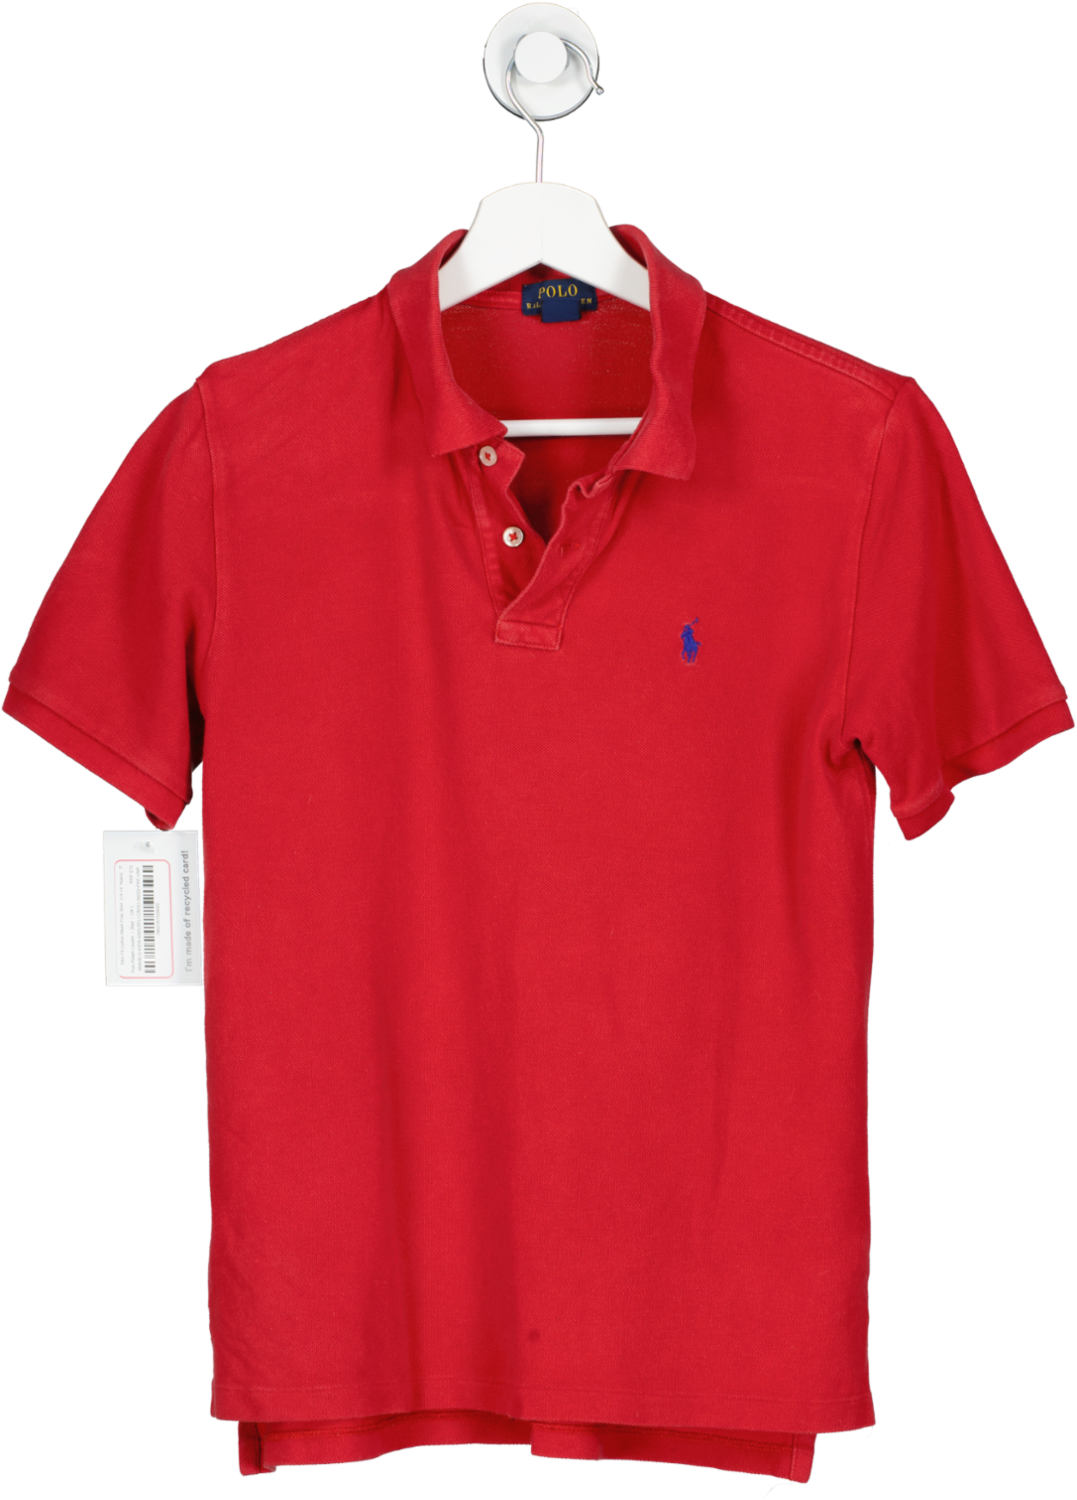 Polo Ralph Lauren Red Slim Fit Cotton Mesh Polo Shirt  (14-16 Years) UK L